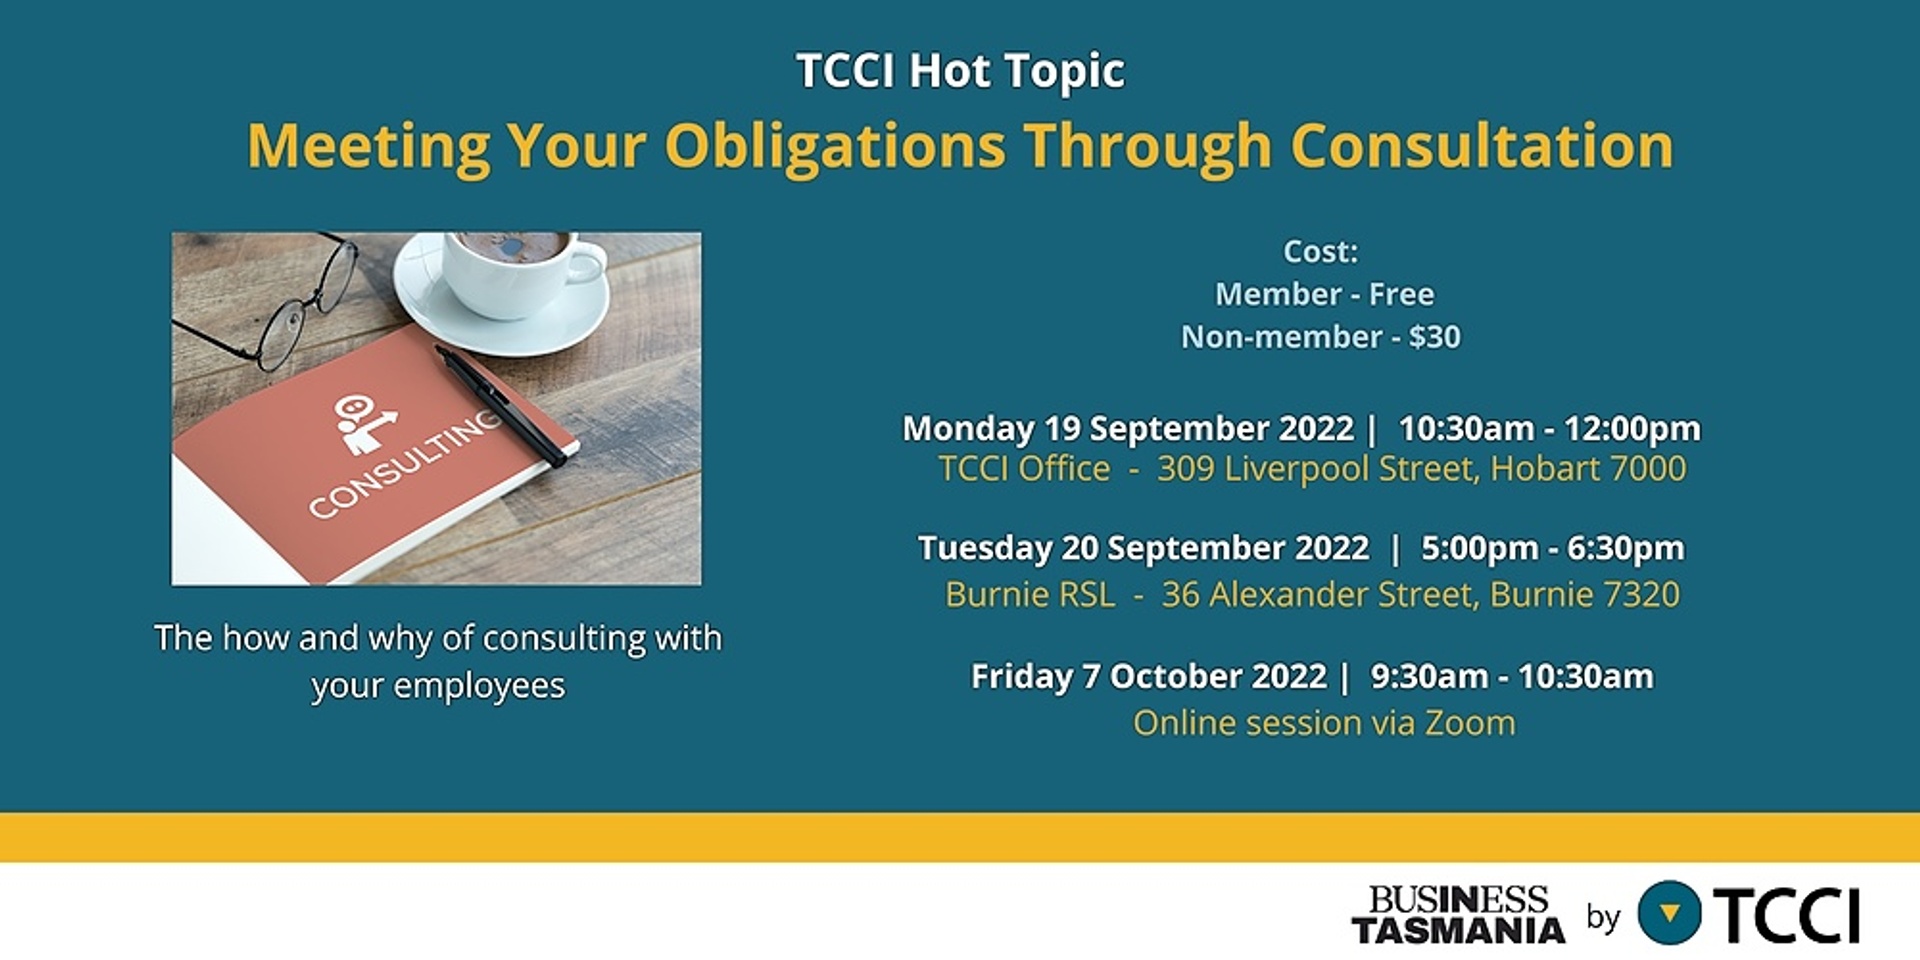 TCCI Hot Topic - Meeting Your Obligations Through Consultation (Online)